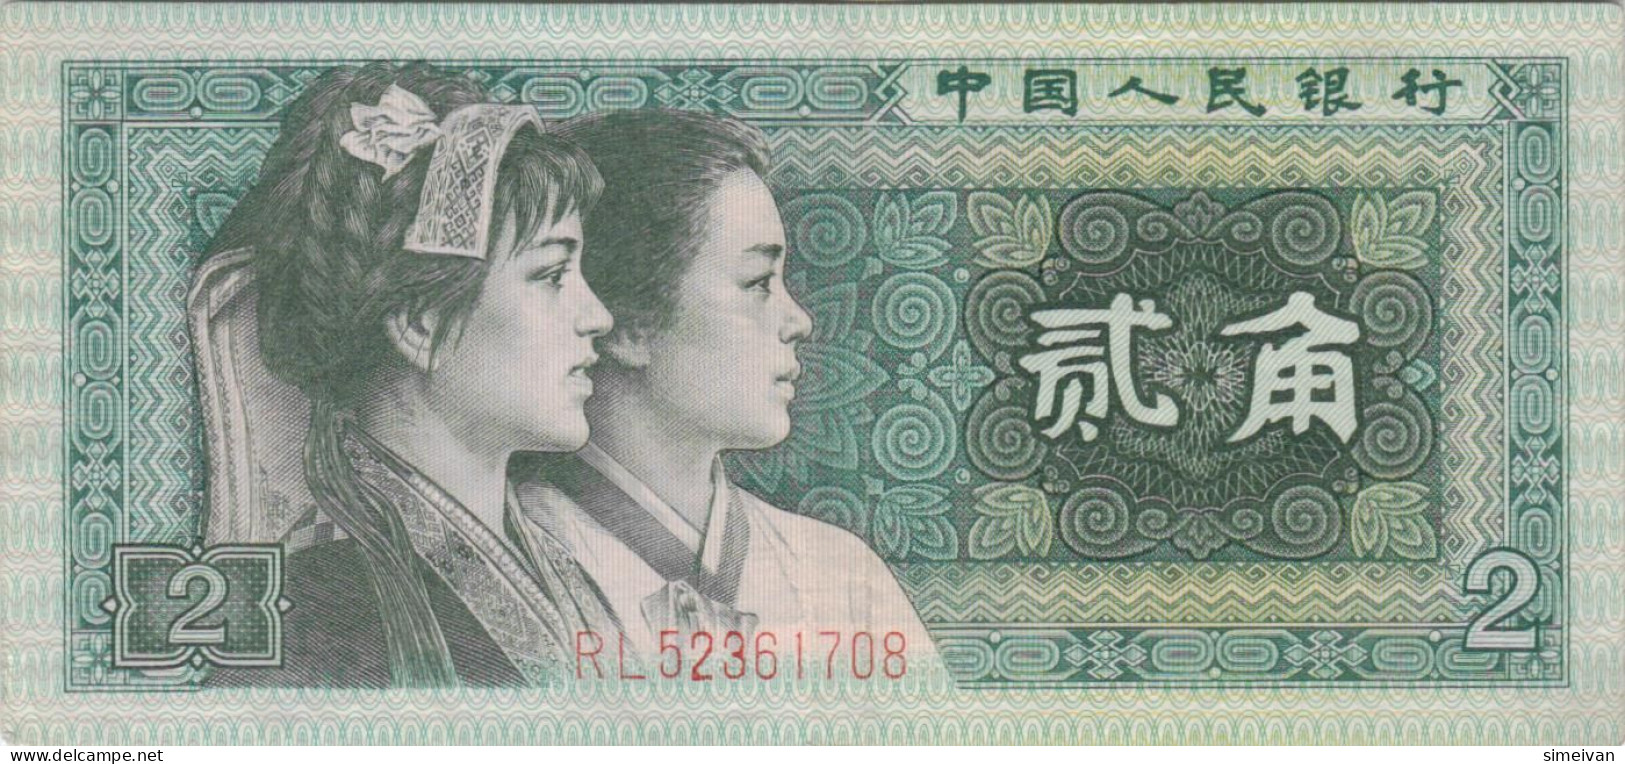 China 2 Jiao 1980 P-882a Banknote Asia Currency Chine #5286 - Chine